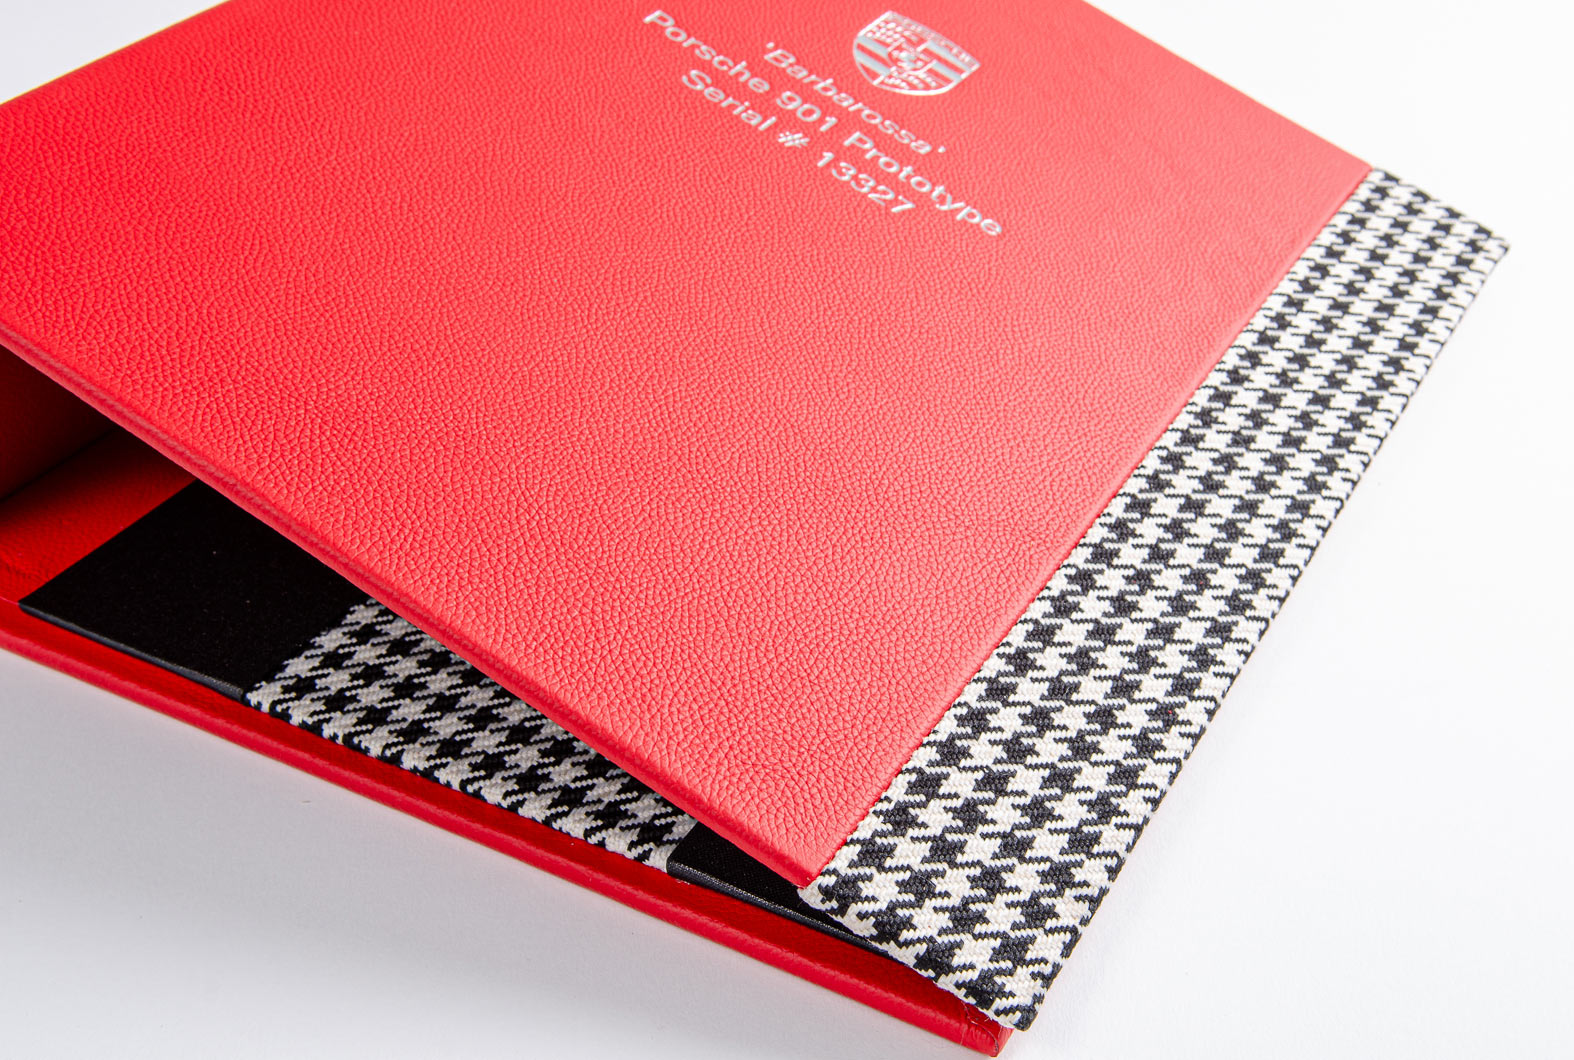 luxury red leather ring binder for historic car documents with fabric seat cover detail and personalised cover